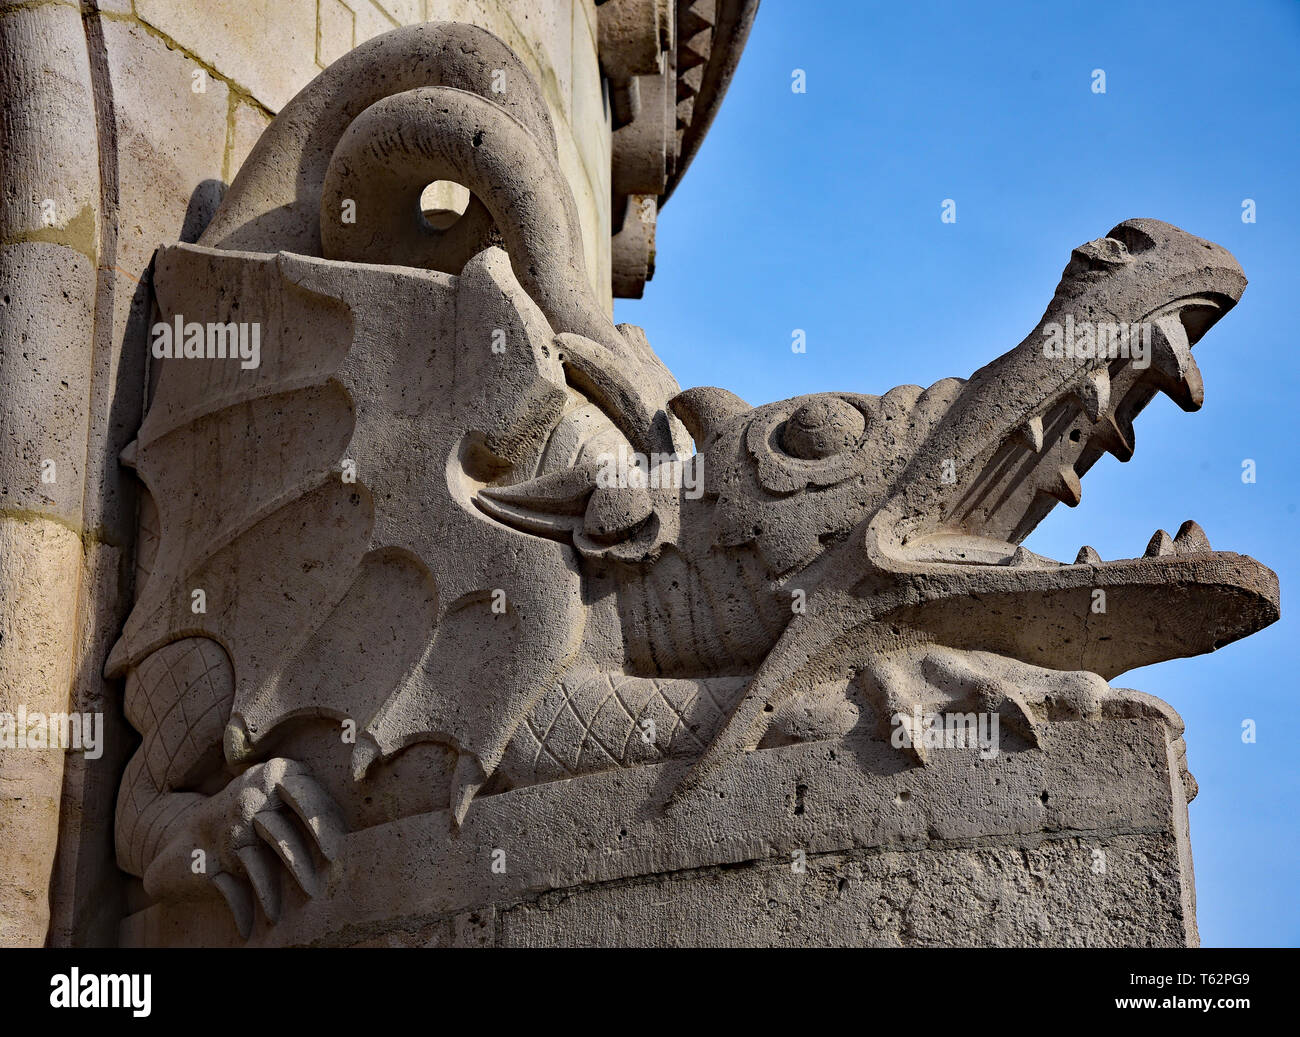 Ornate dragon stone sculpture guards the beautiful decorative fortification Fisherman's Bastion, Castle Hill, Budapest, Hungary, Europe. Stock Photo